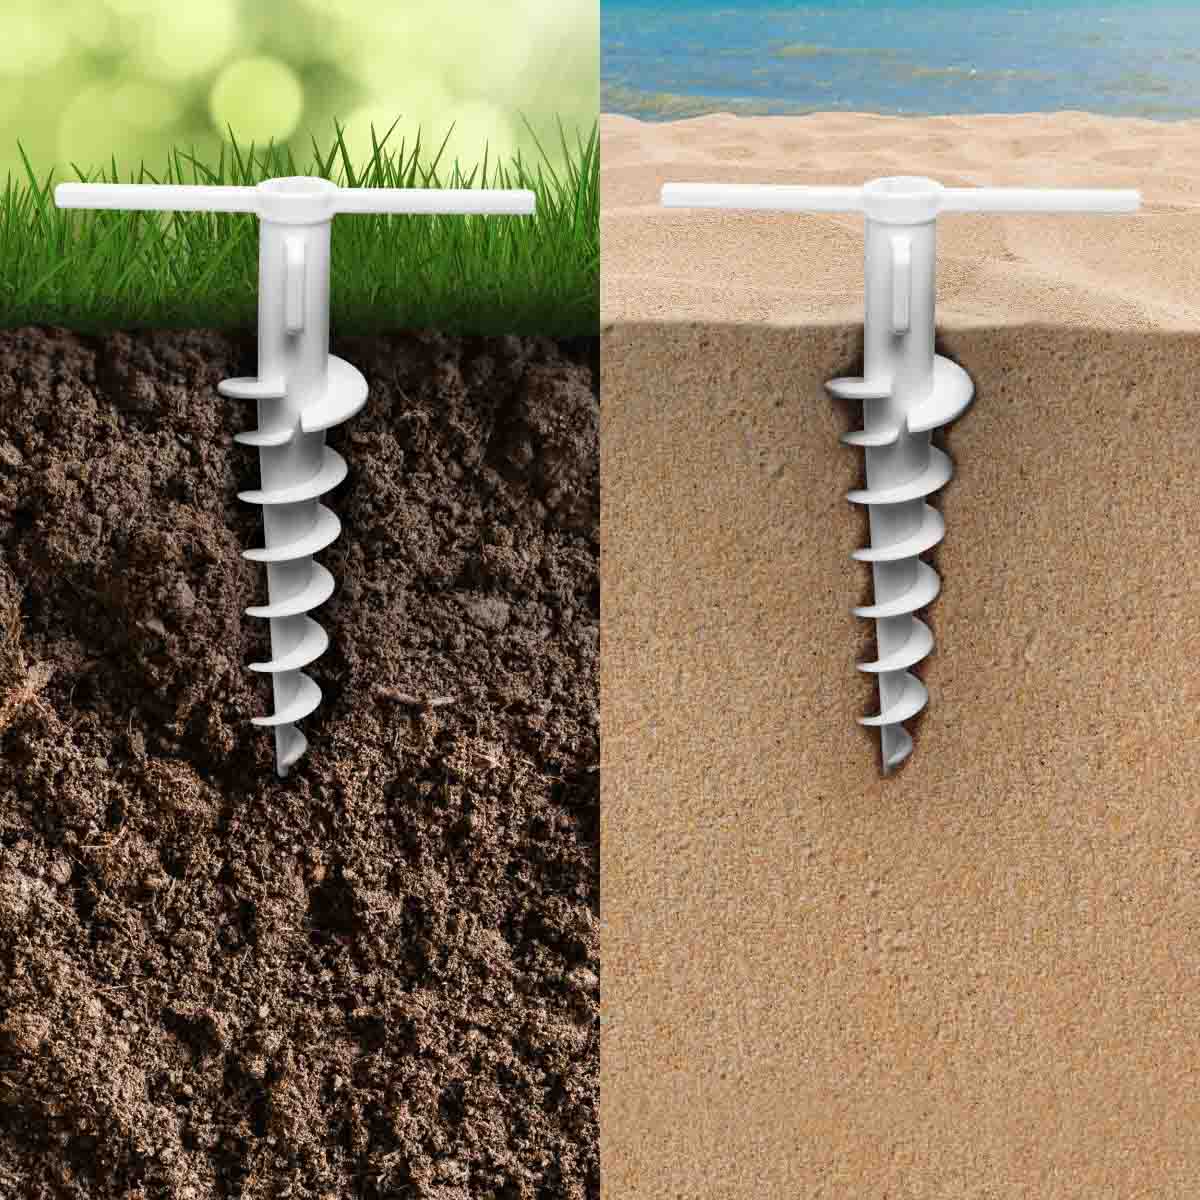 Plastic Beach Umbrella Sand Anchor, Umbrella Stand Holder could be used either in sand or on the ground